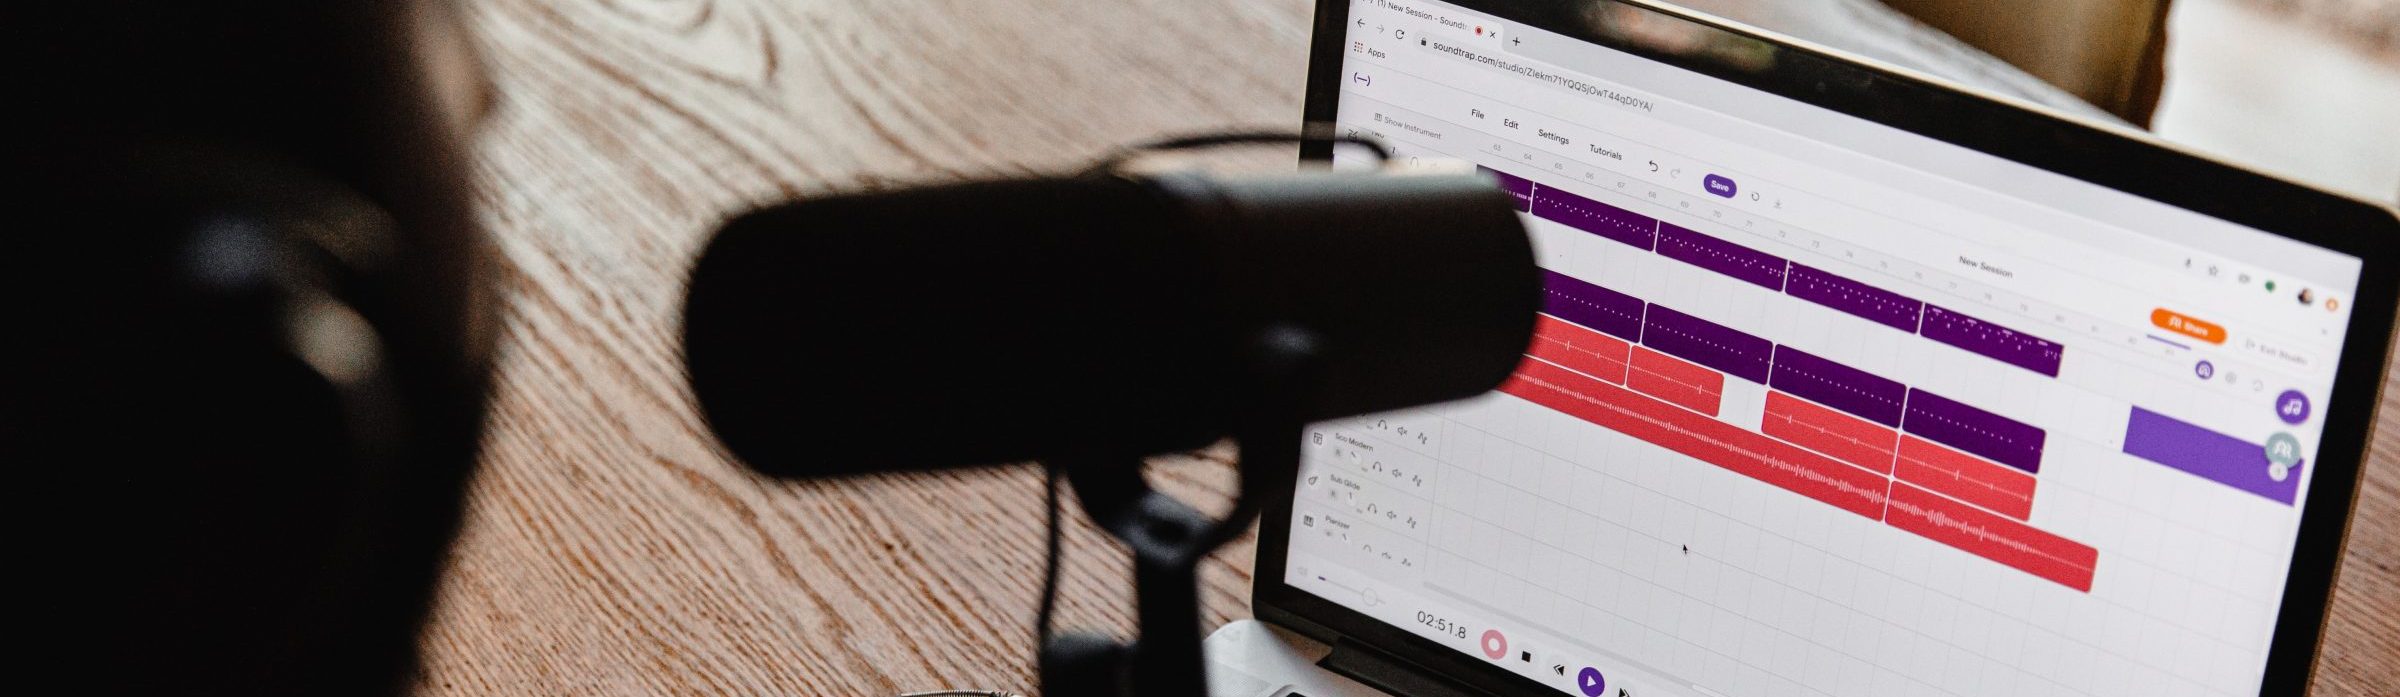 Creating Podcasts: How to Make a Podcast with a Zero-Dollar Budget